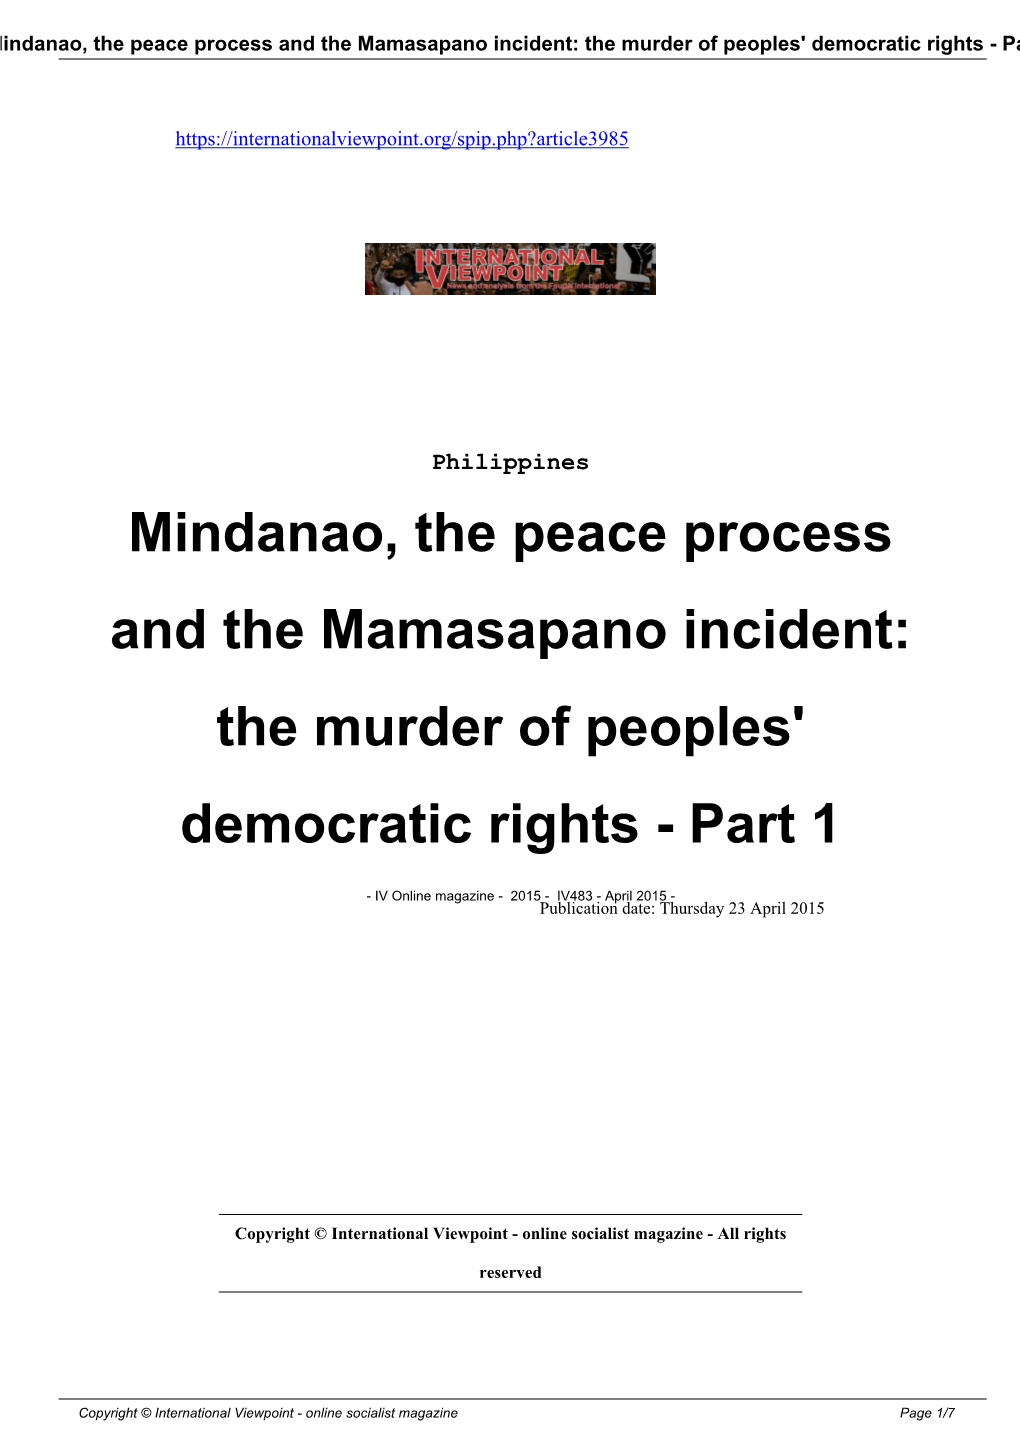 Mindanao, the Peace Process and the Mamasapano Incident: the Murder of Peoples' Democratic Rights - Part 1